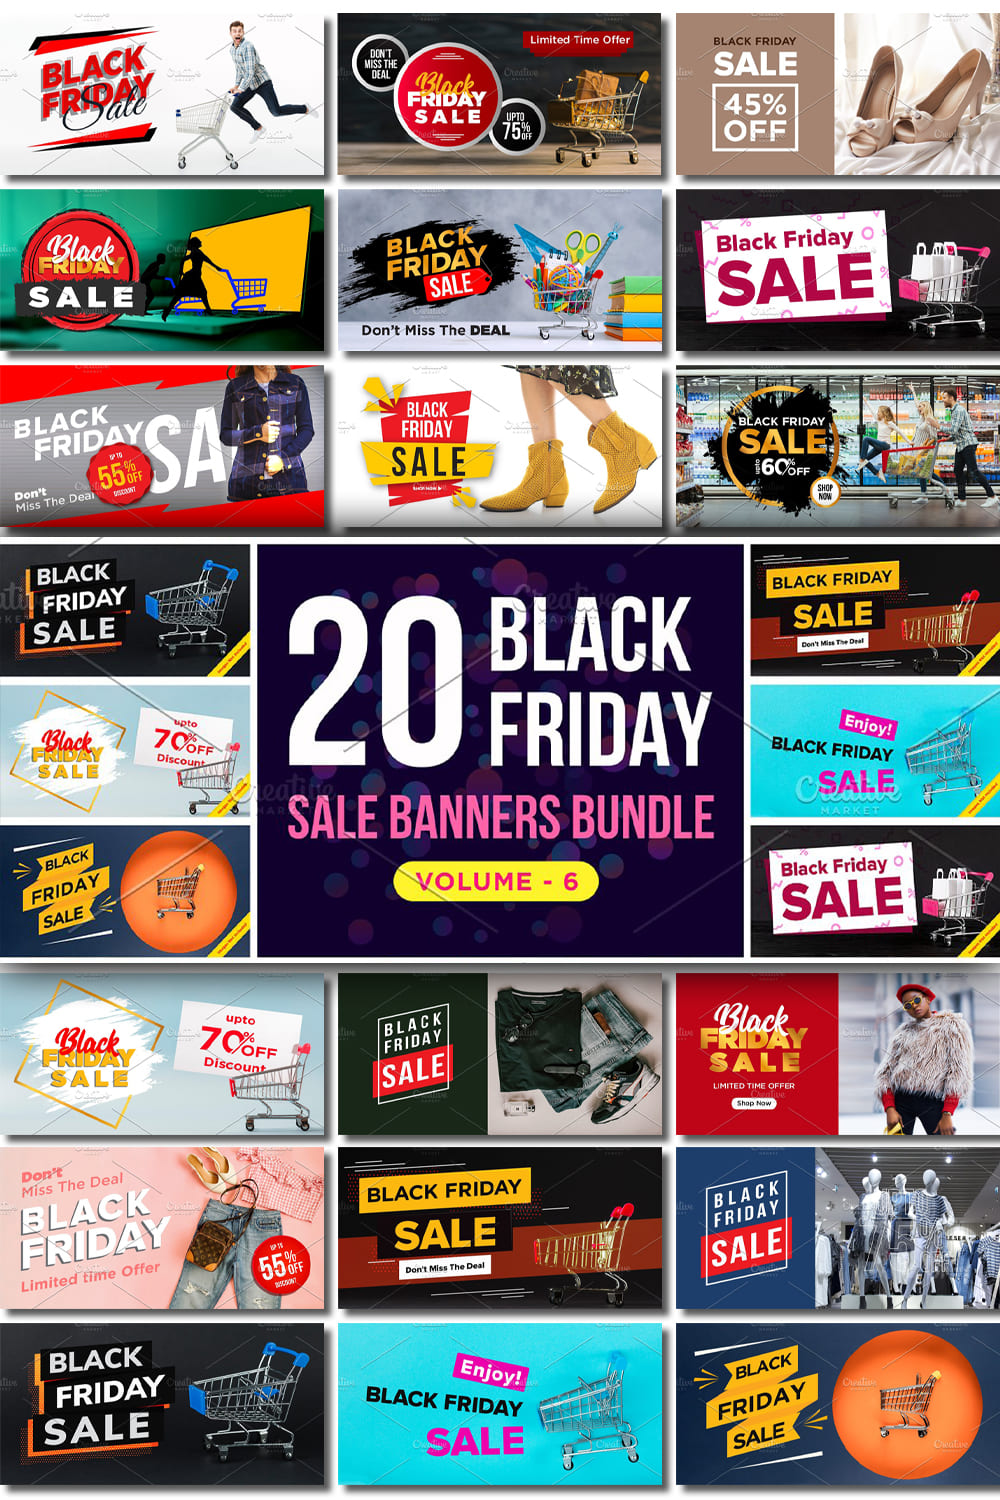 Black Friday Sale Banners - pinterest image preview.